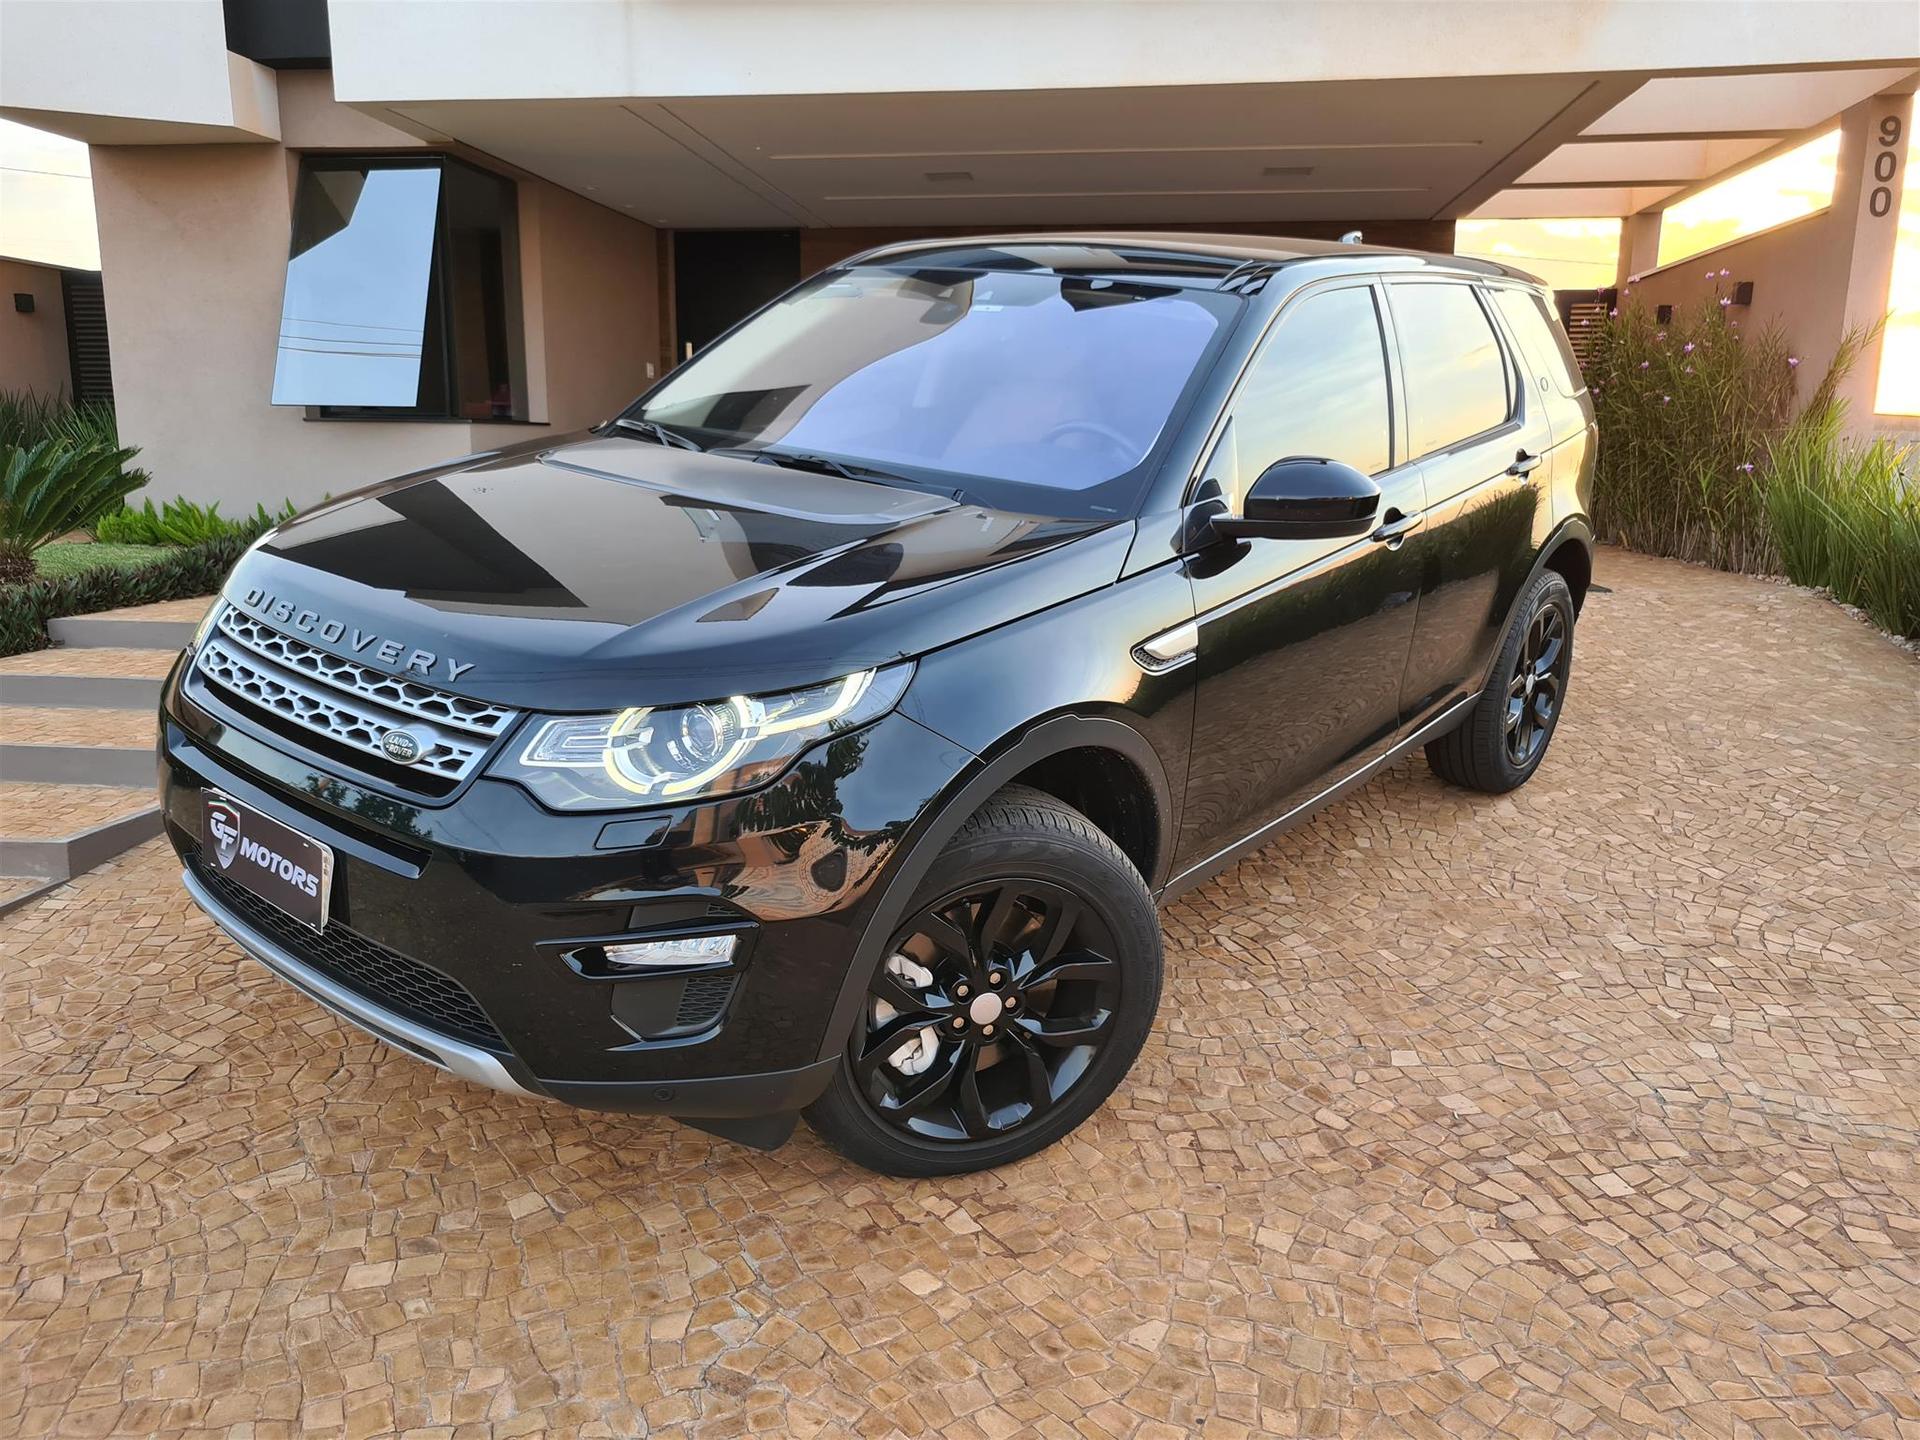 Land Rover Discovery Sport 2.0 16v Td4 Turbo Diesel Hse 4p Automatico Wmimagem08513808684